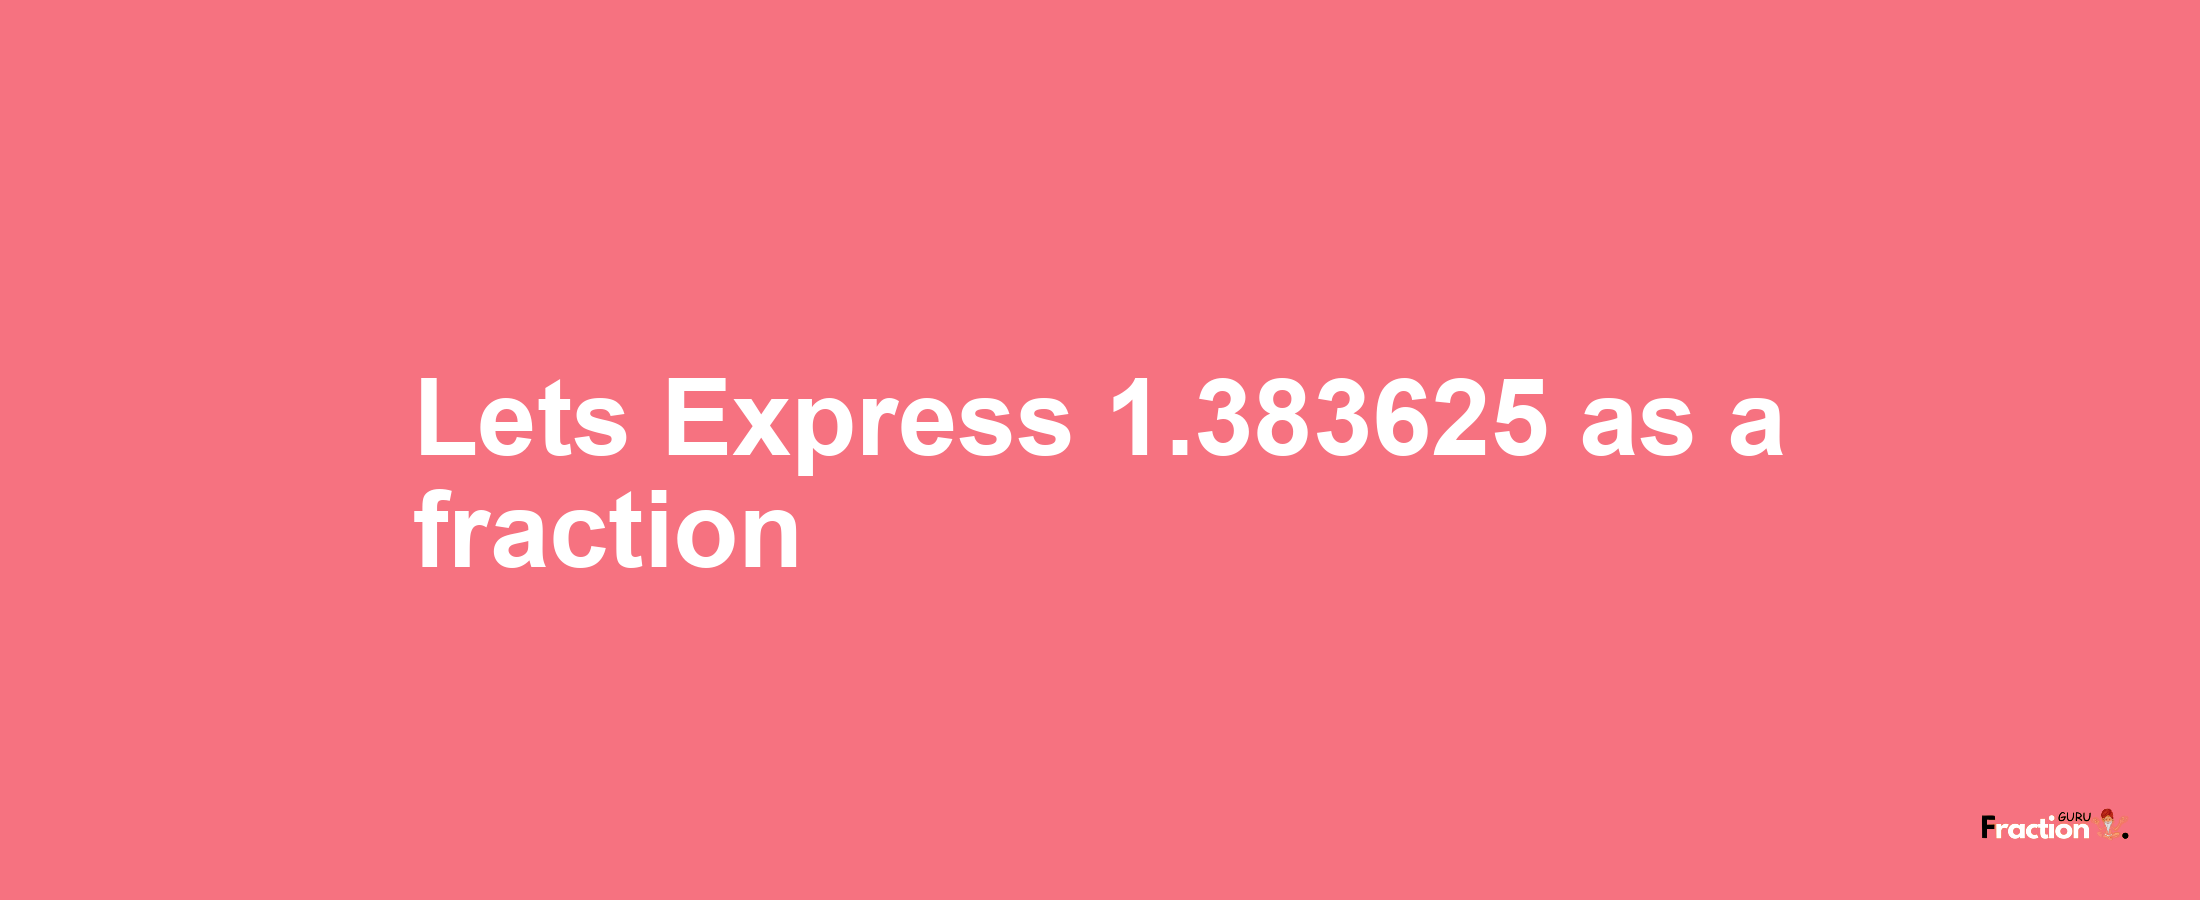 Lets Express 1.383625 as afraction